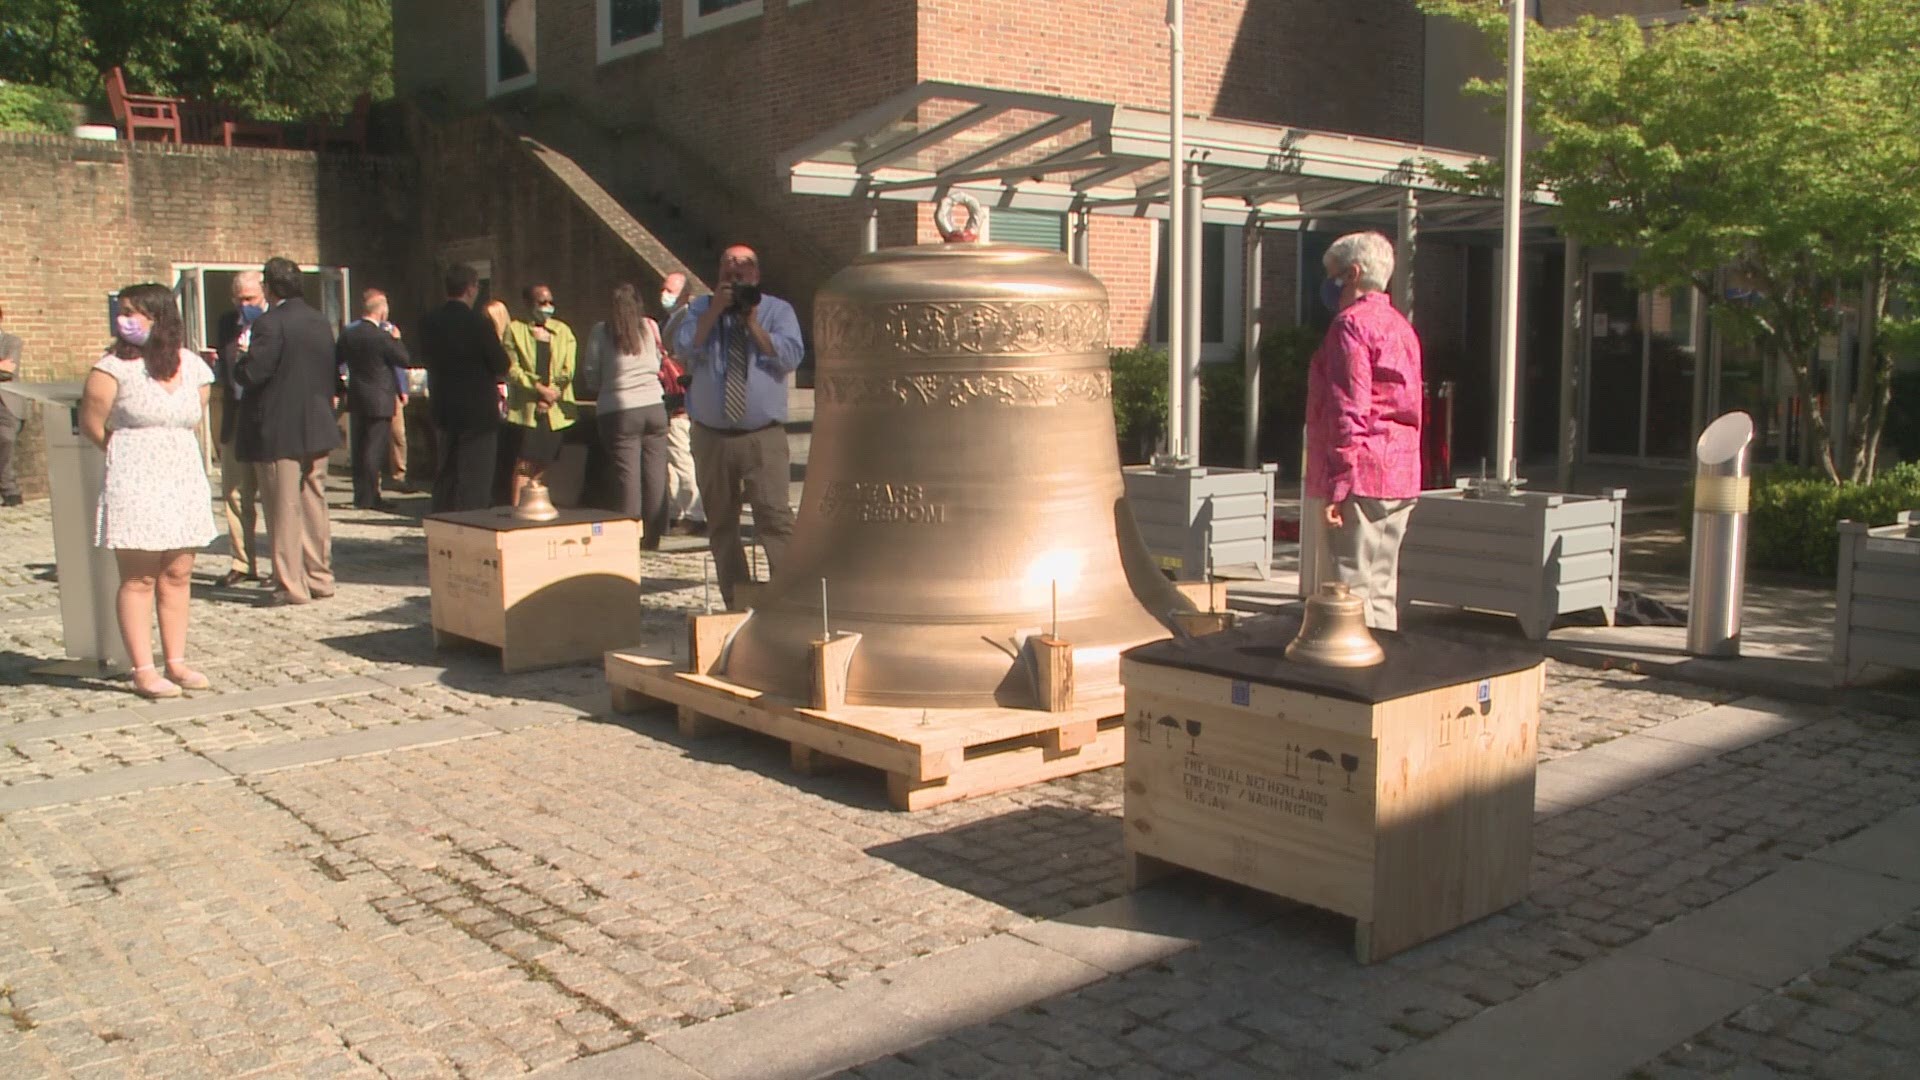 Three bells named for influential Americans have been unveiled at a new exhibit at the Netherlands Embassy in the District.